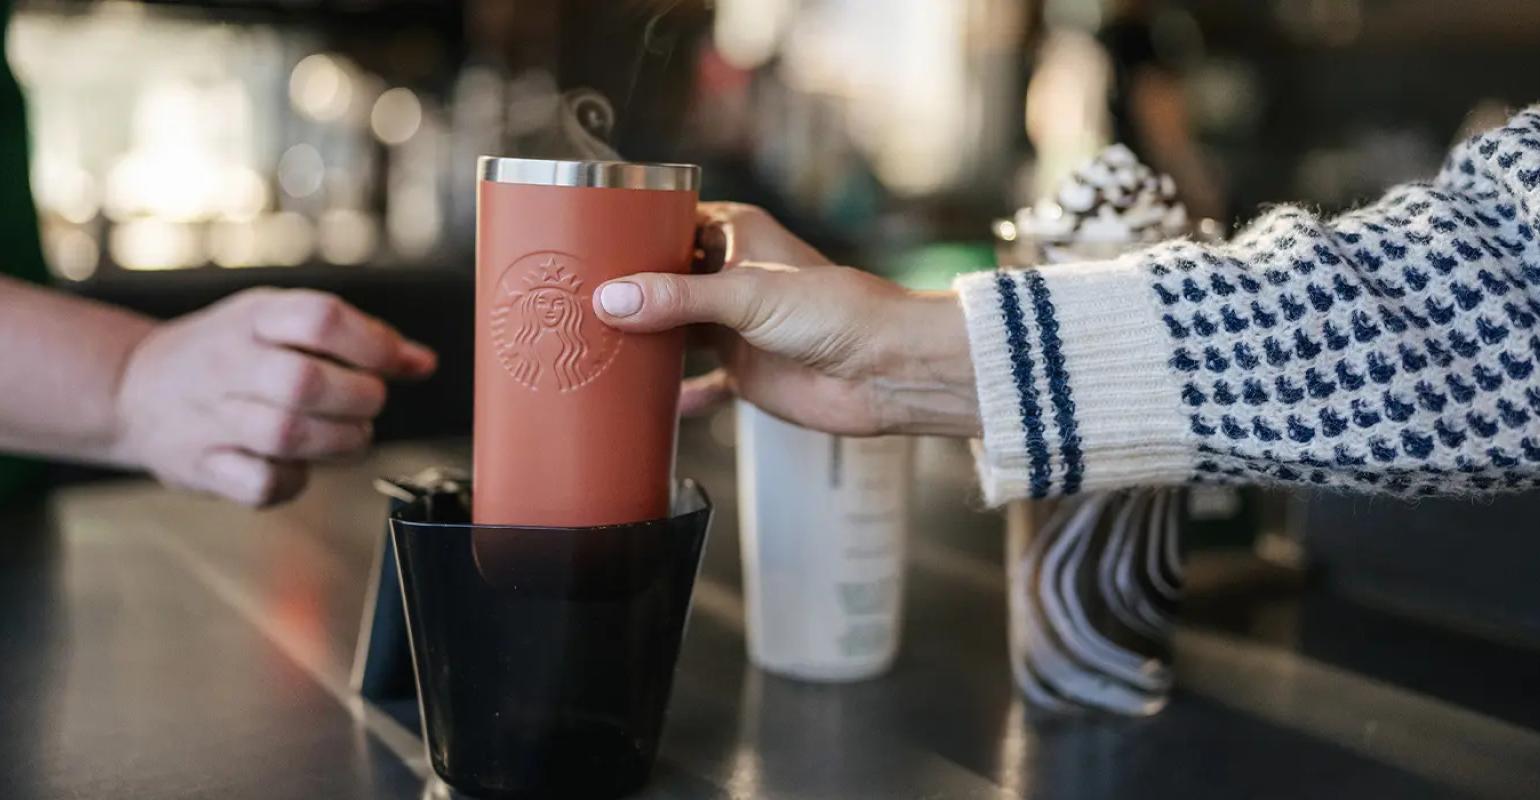 What You Need to Know About Bringing Your Own Cup to Starbucks